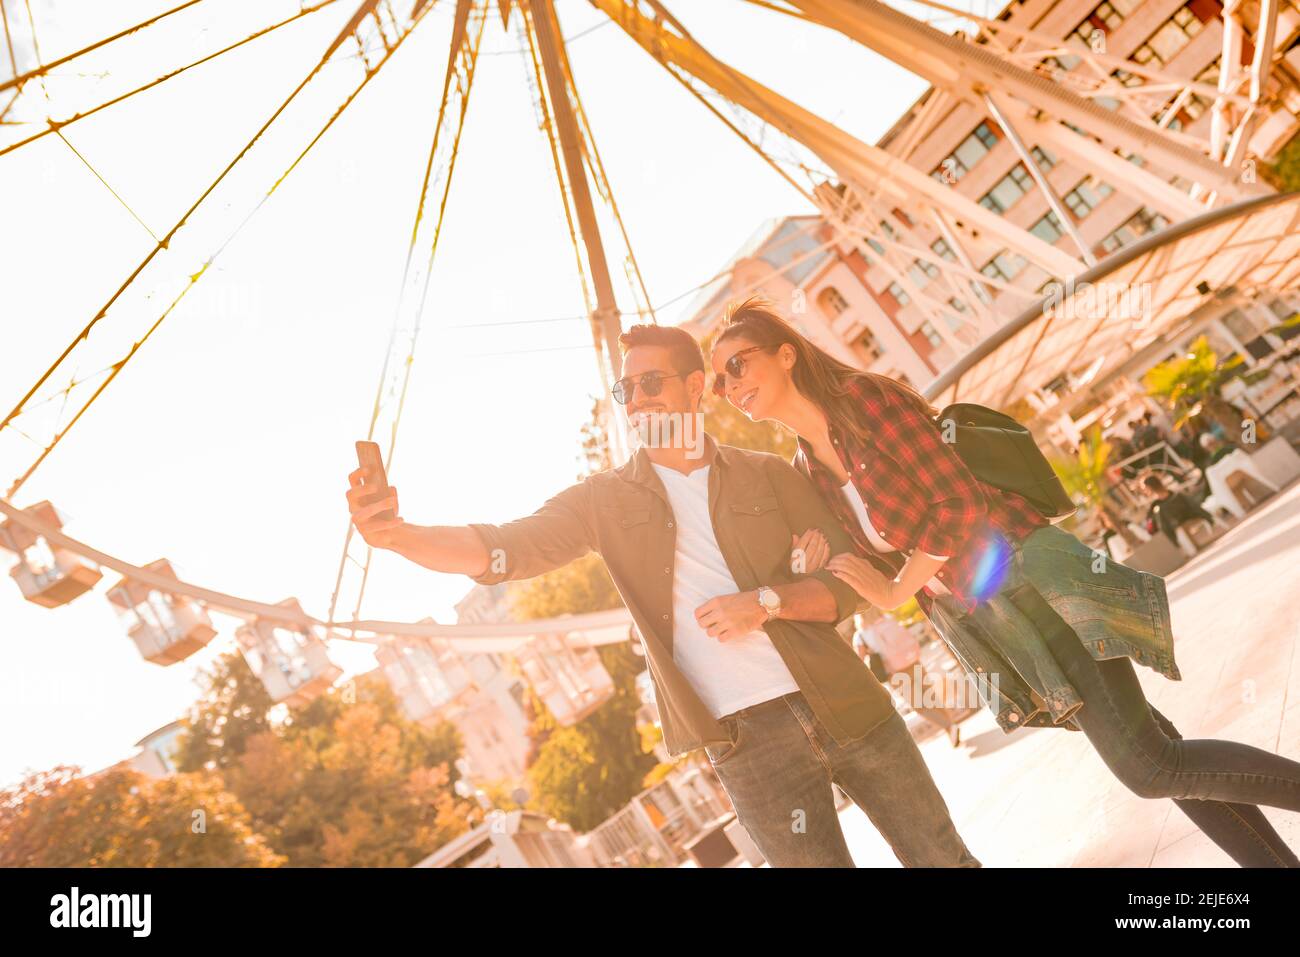 A traveling couple taking a selfie at a Ferris wheel on a sunny summer day. Stock Photo